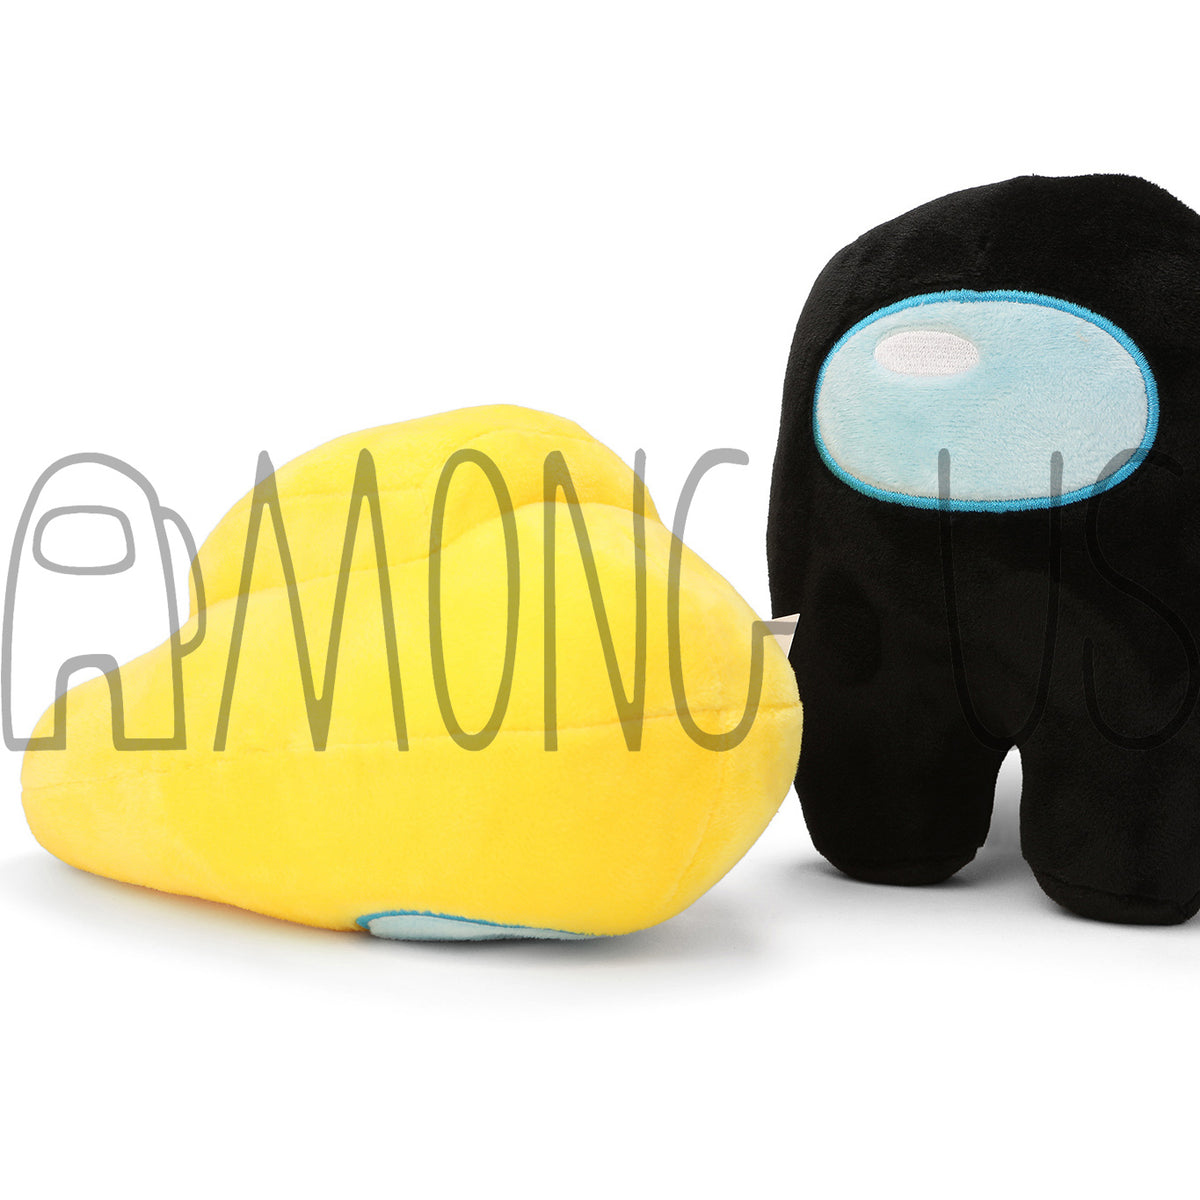 A product photo of the yellow plush lying face down and the black plush standing nonplussed beside it.